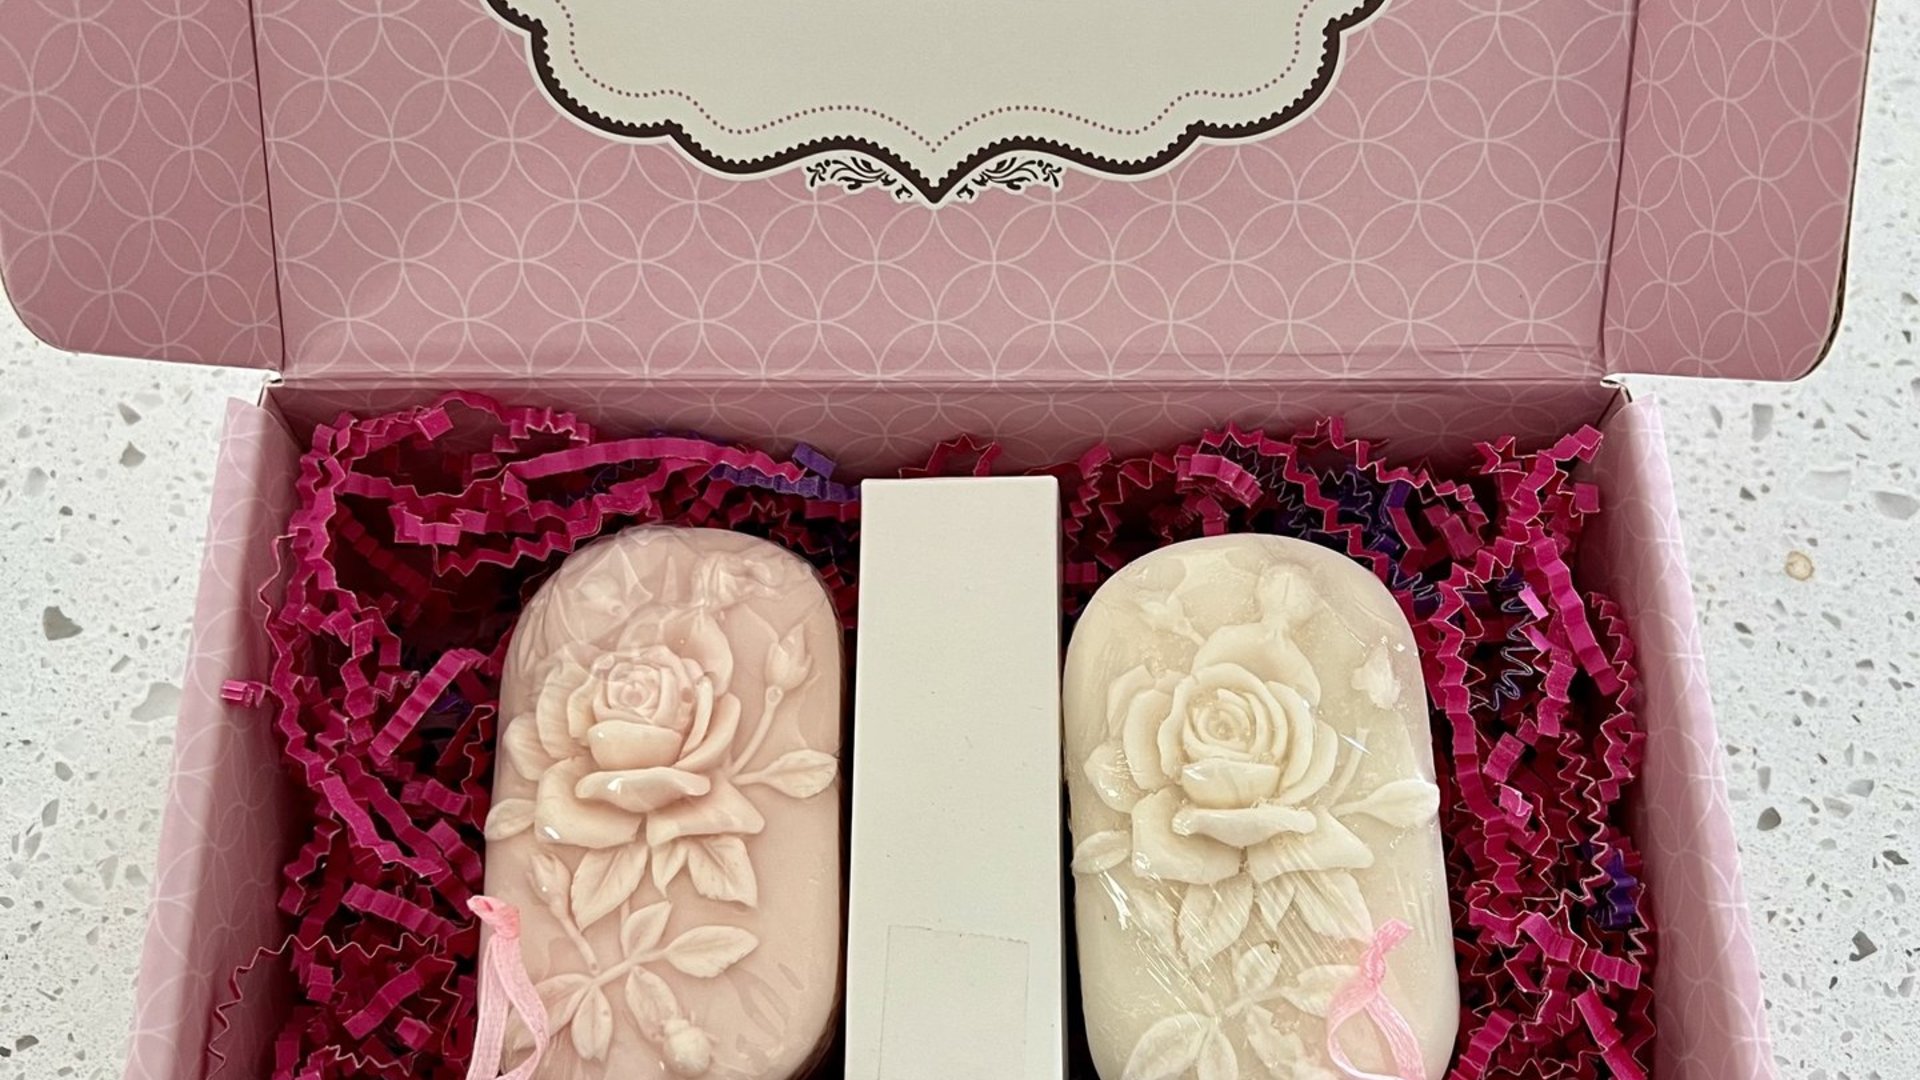 Rose perfume and soap set